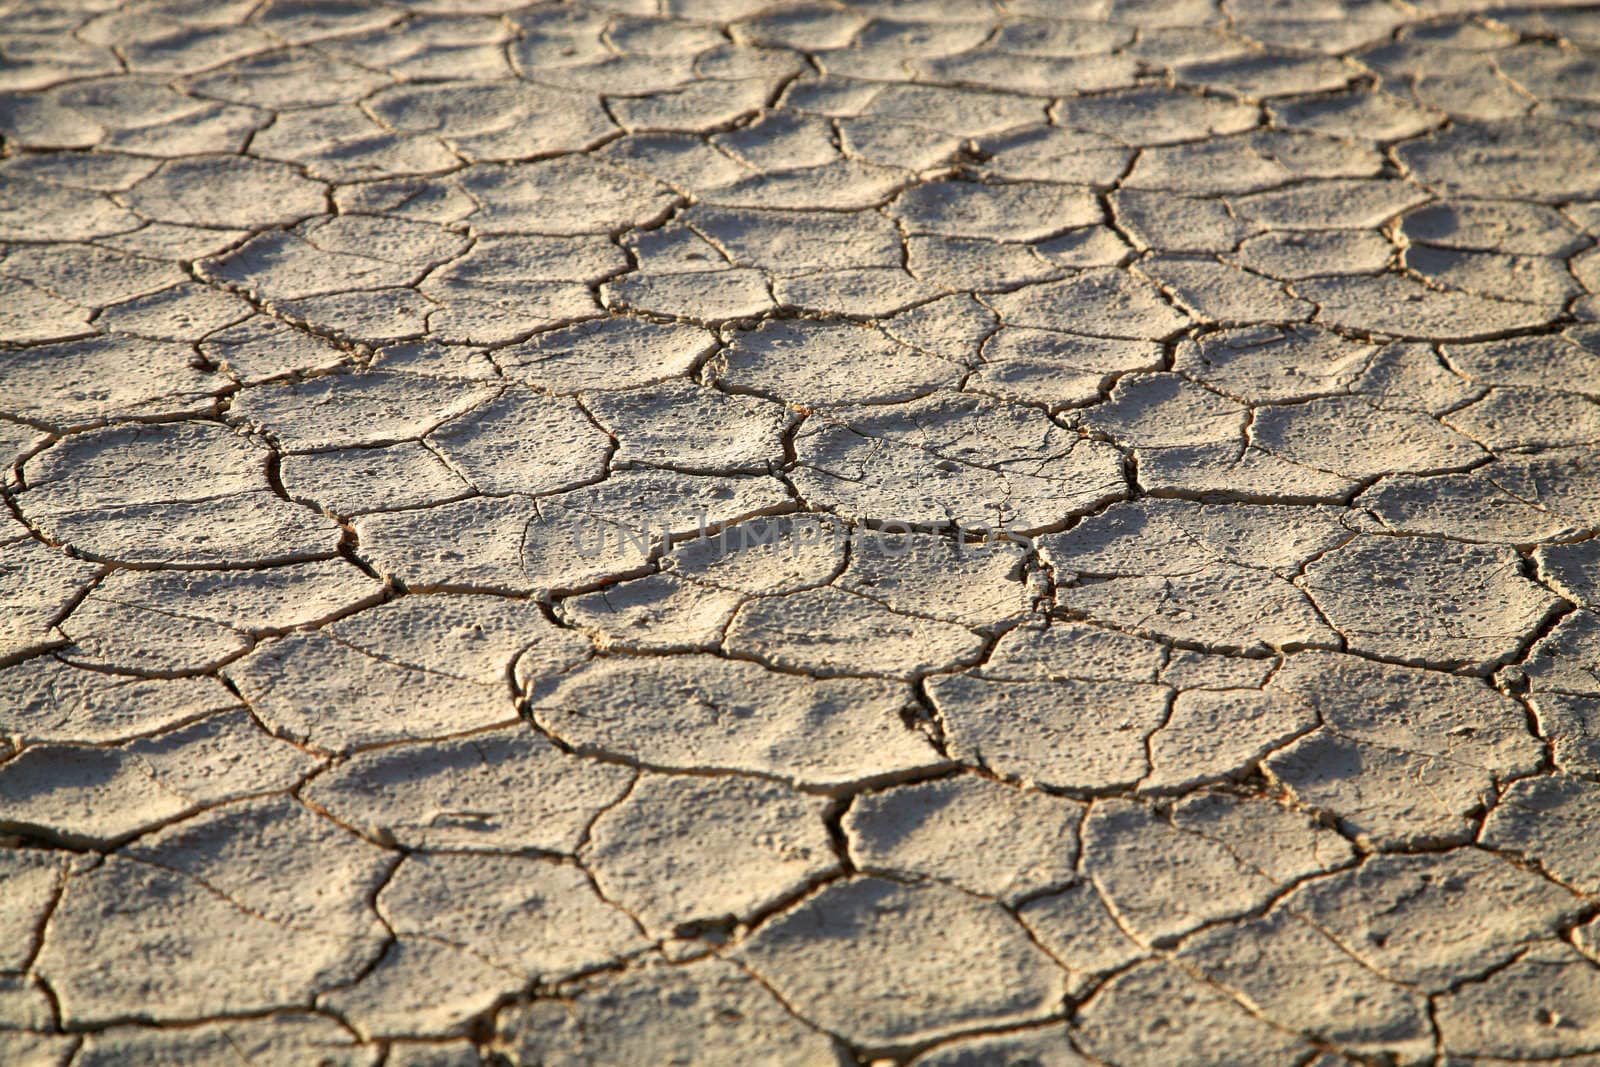 Close-up of pan without water in the Sossusvlei sand dunes in Namibia